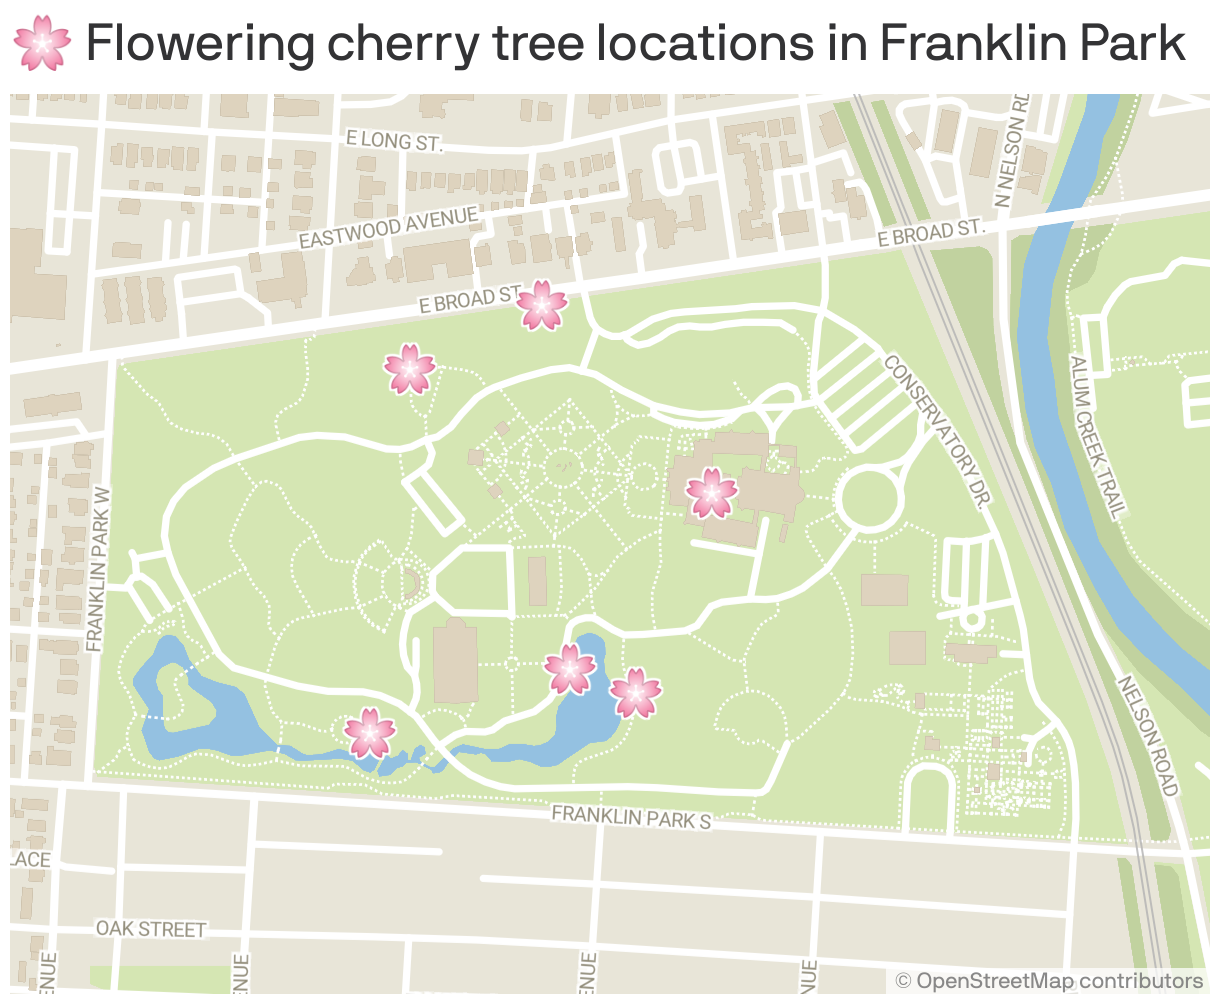 🌸 Flowering cherry tree locations in Franklin Park